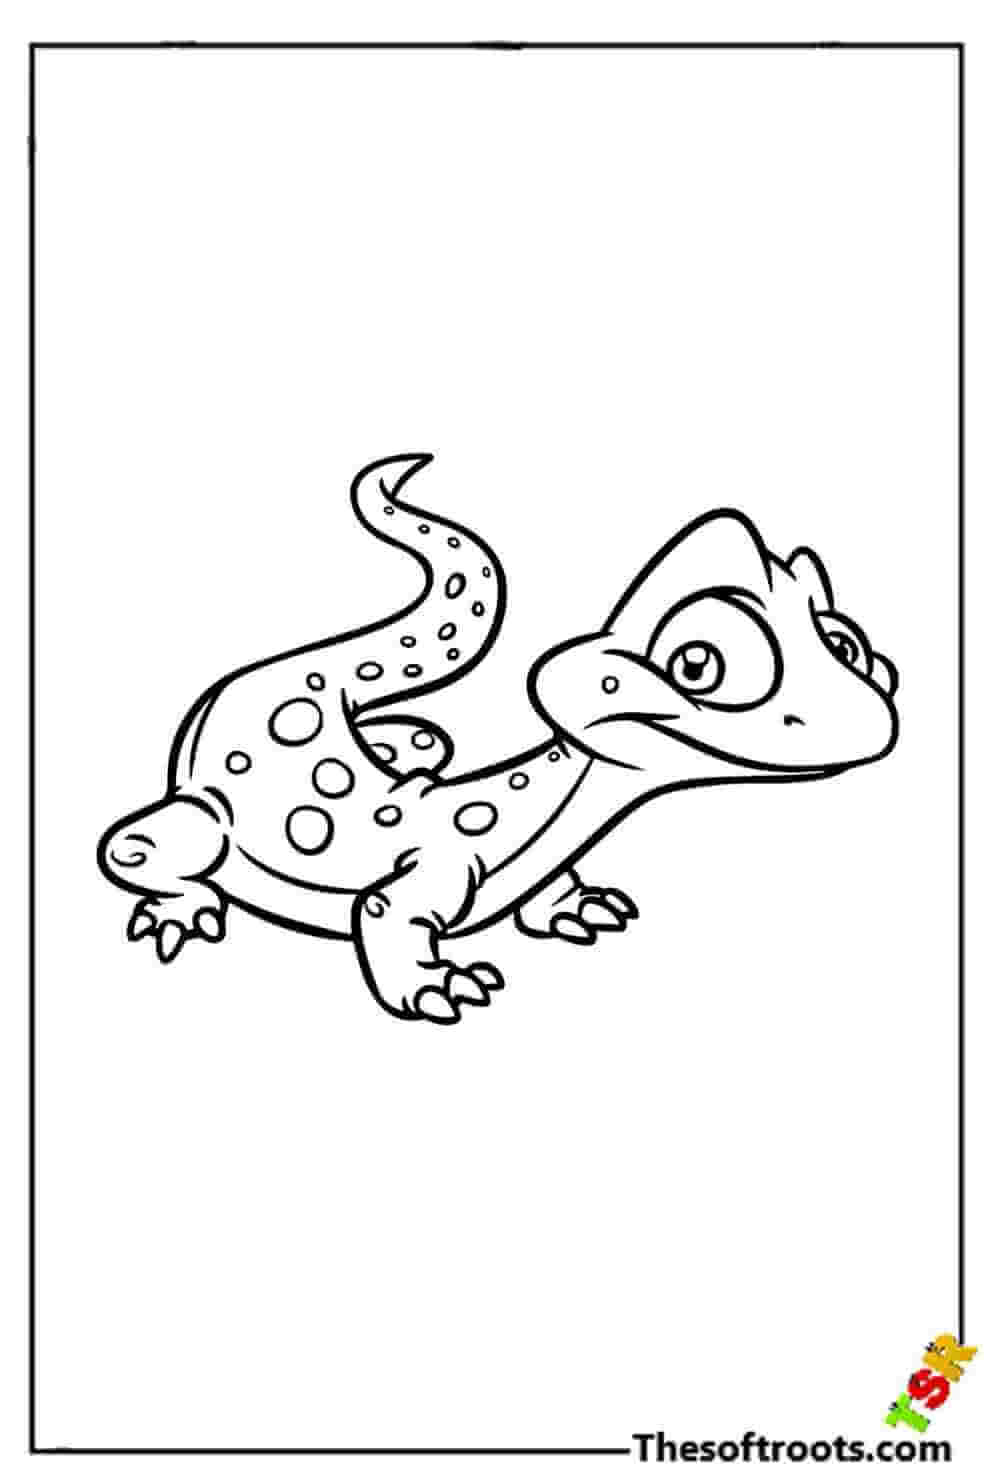 Baby lizard coloring pages